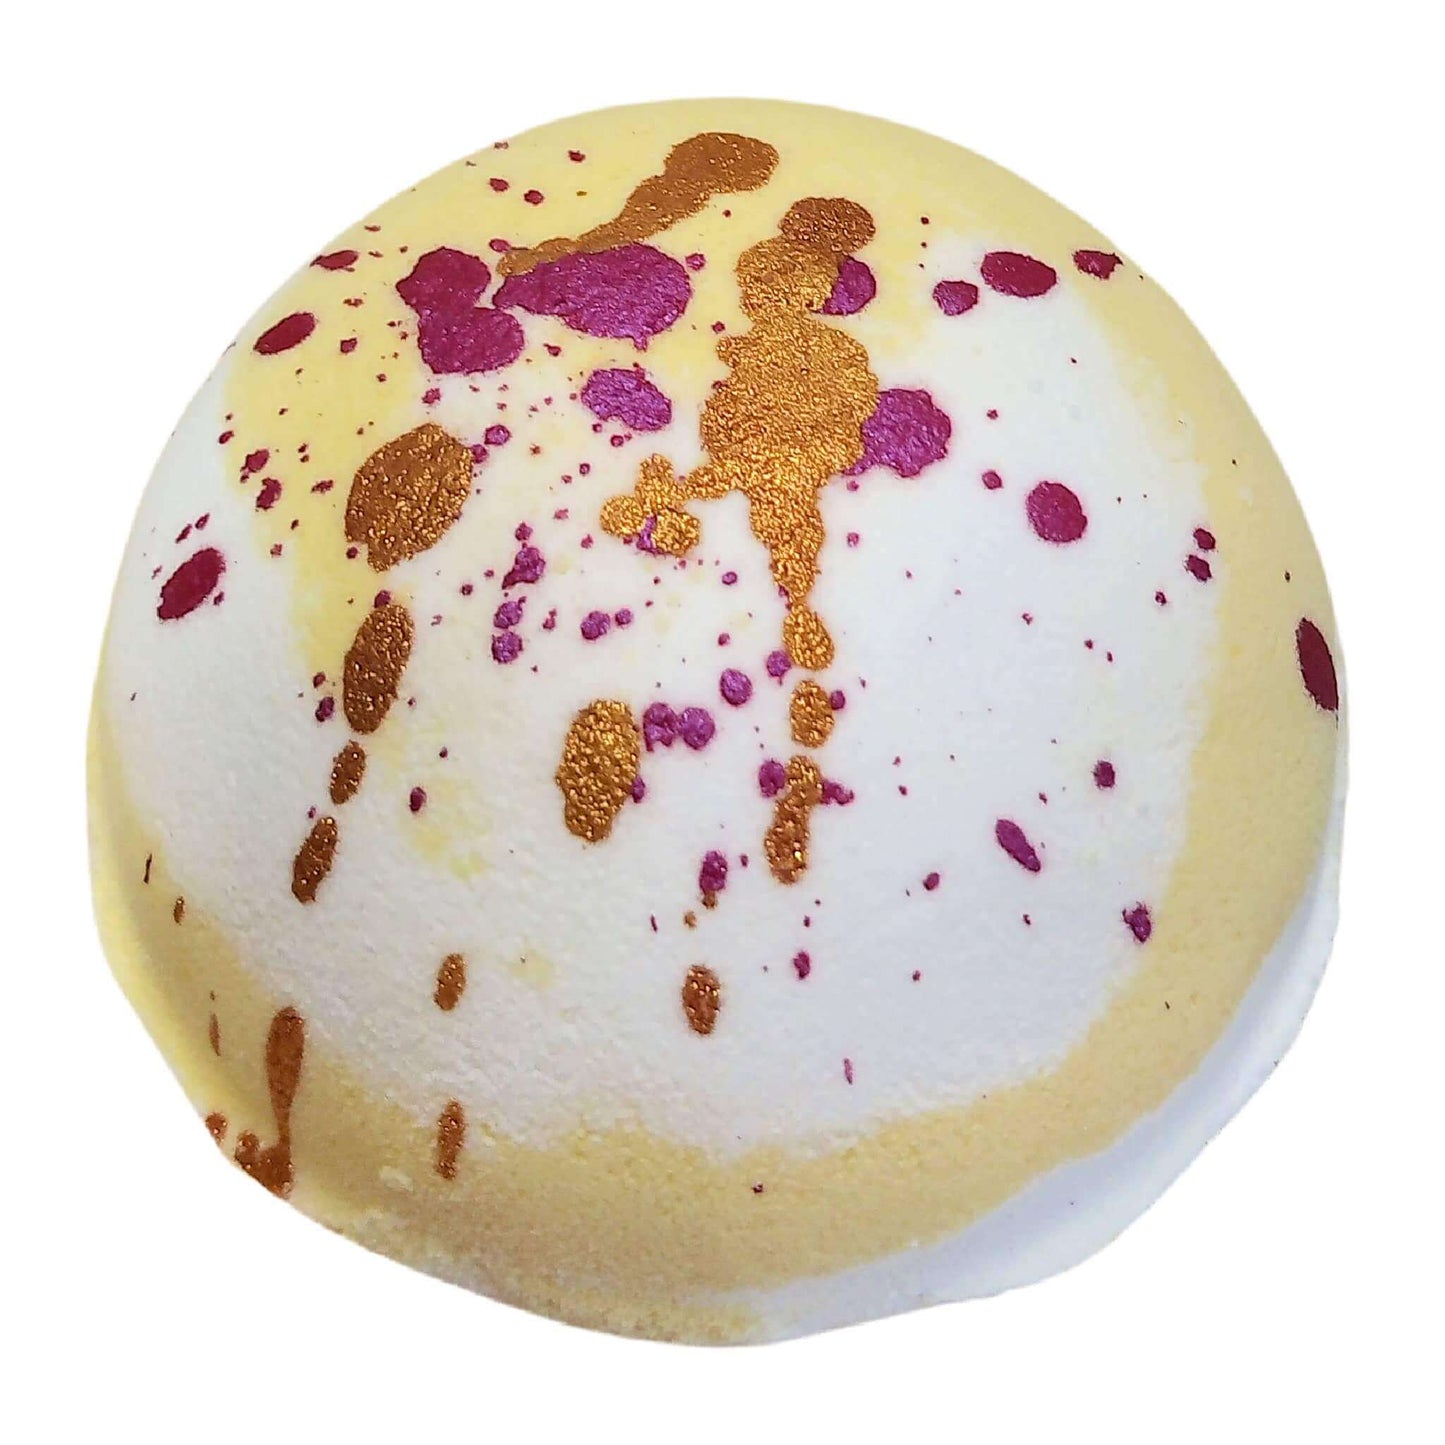 Cherry Lemonade Fizzy Bath Bomb promises a bathing experience that's both refreshing and indulging.